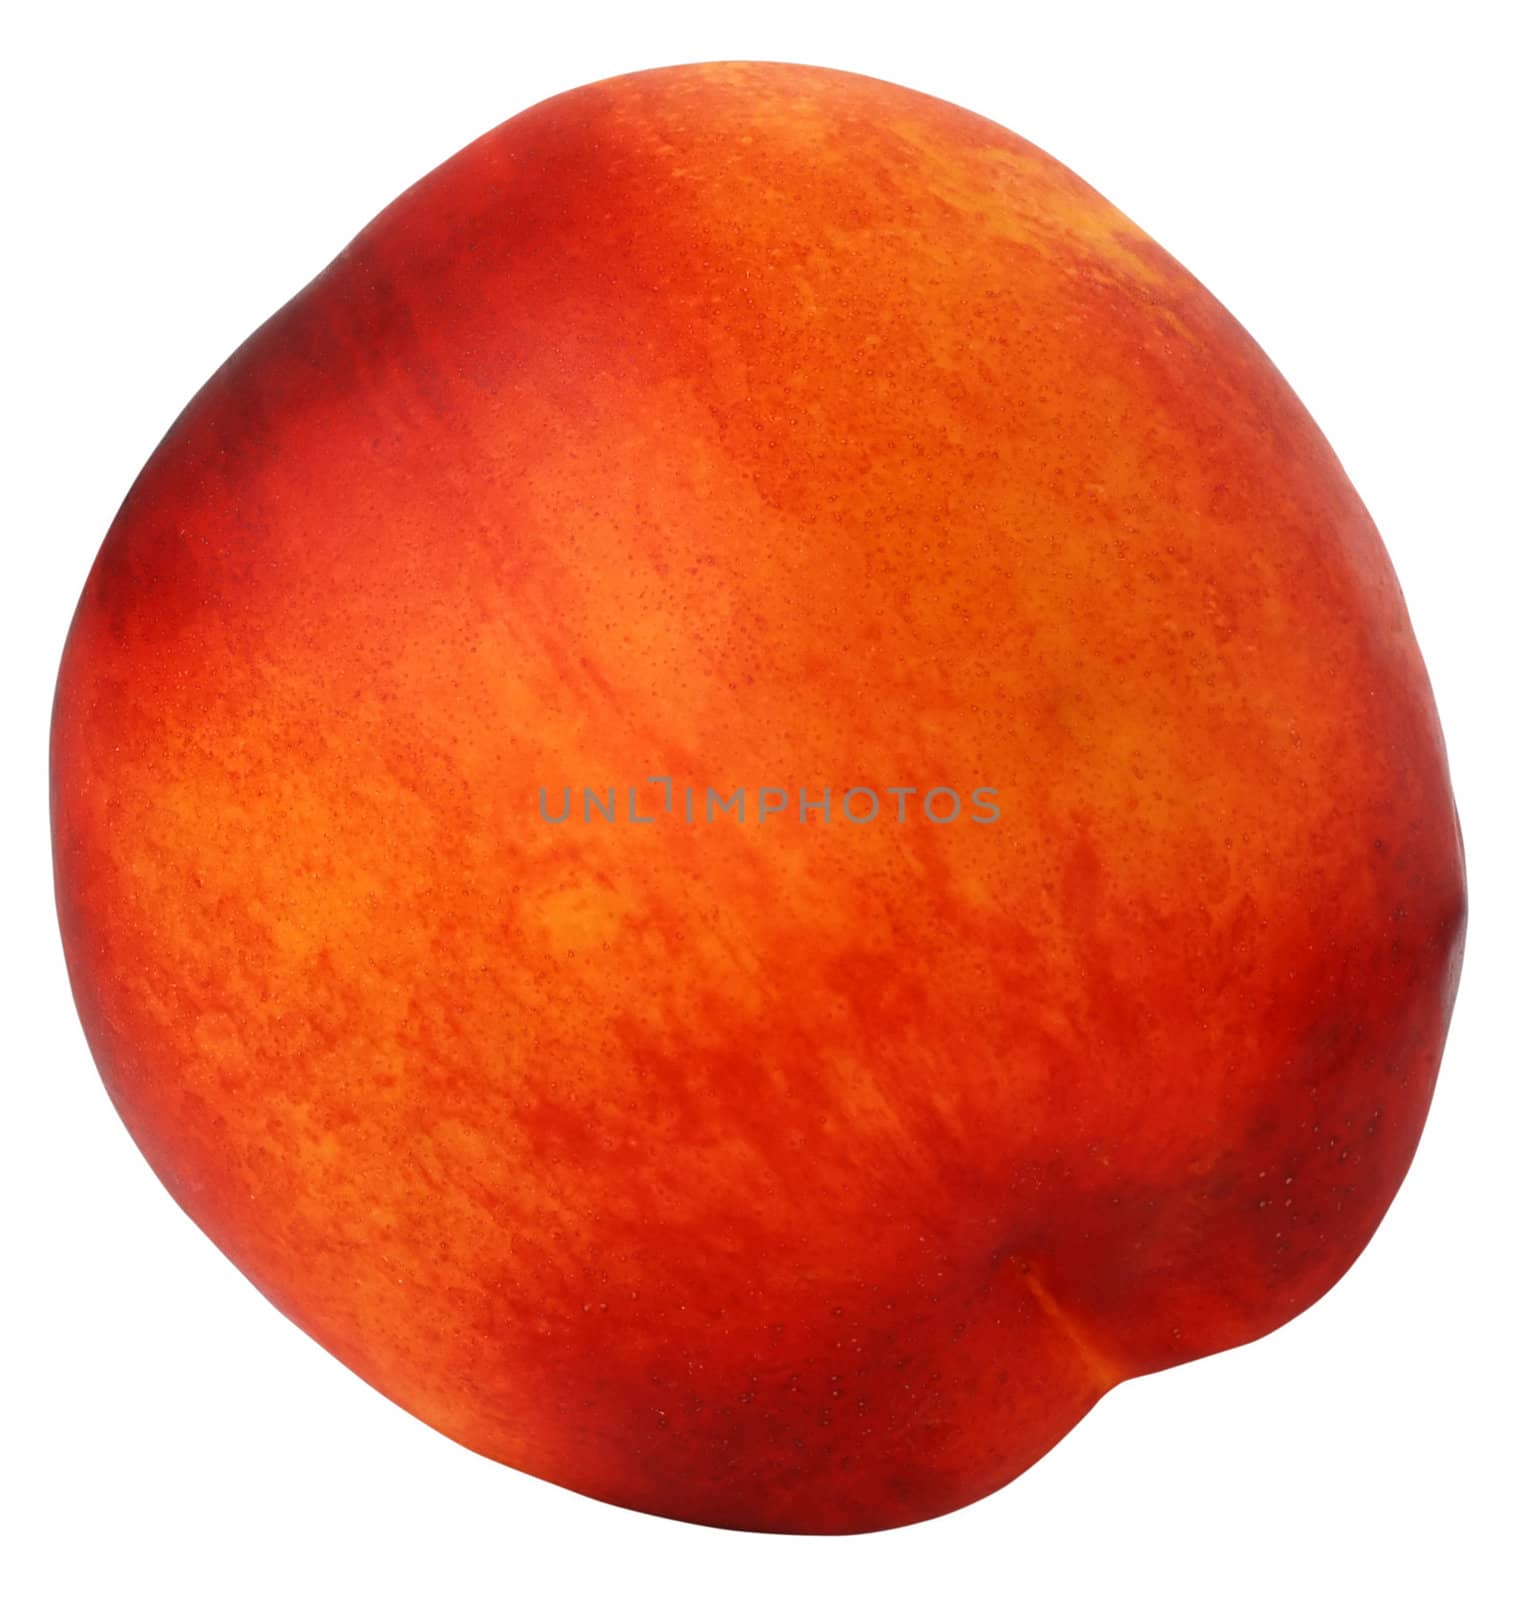 Peach friut isolated on white background with path.